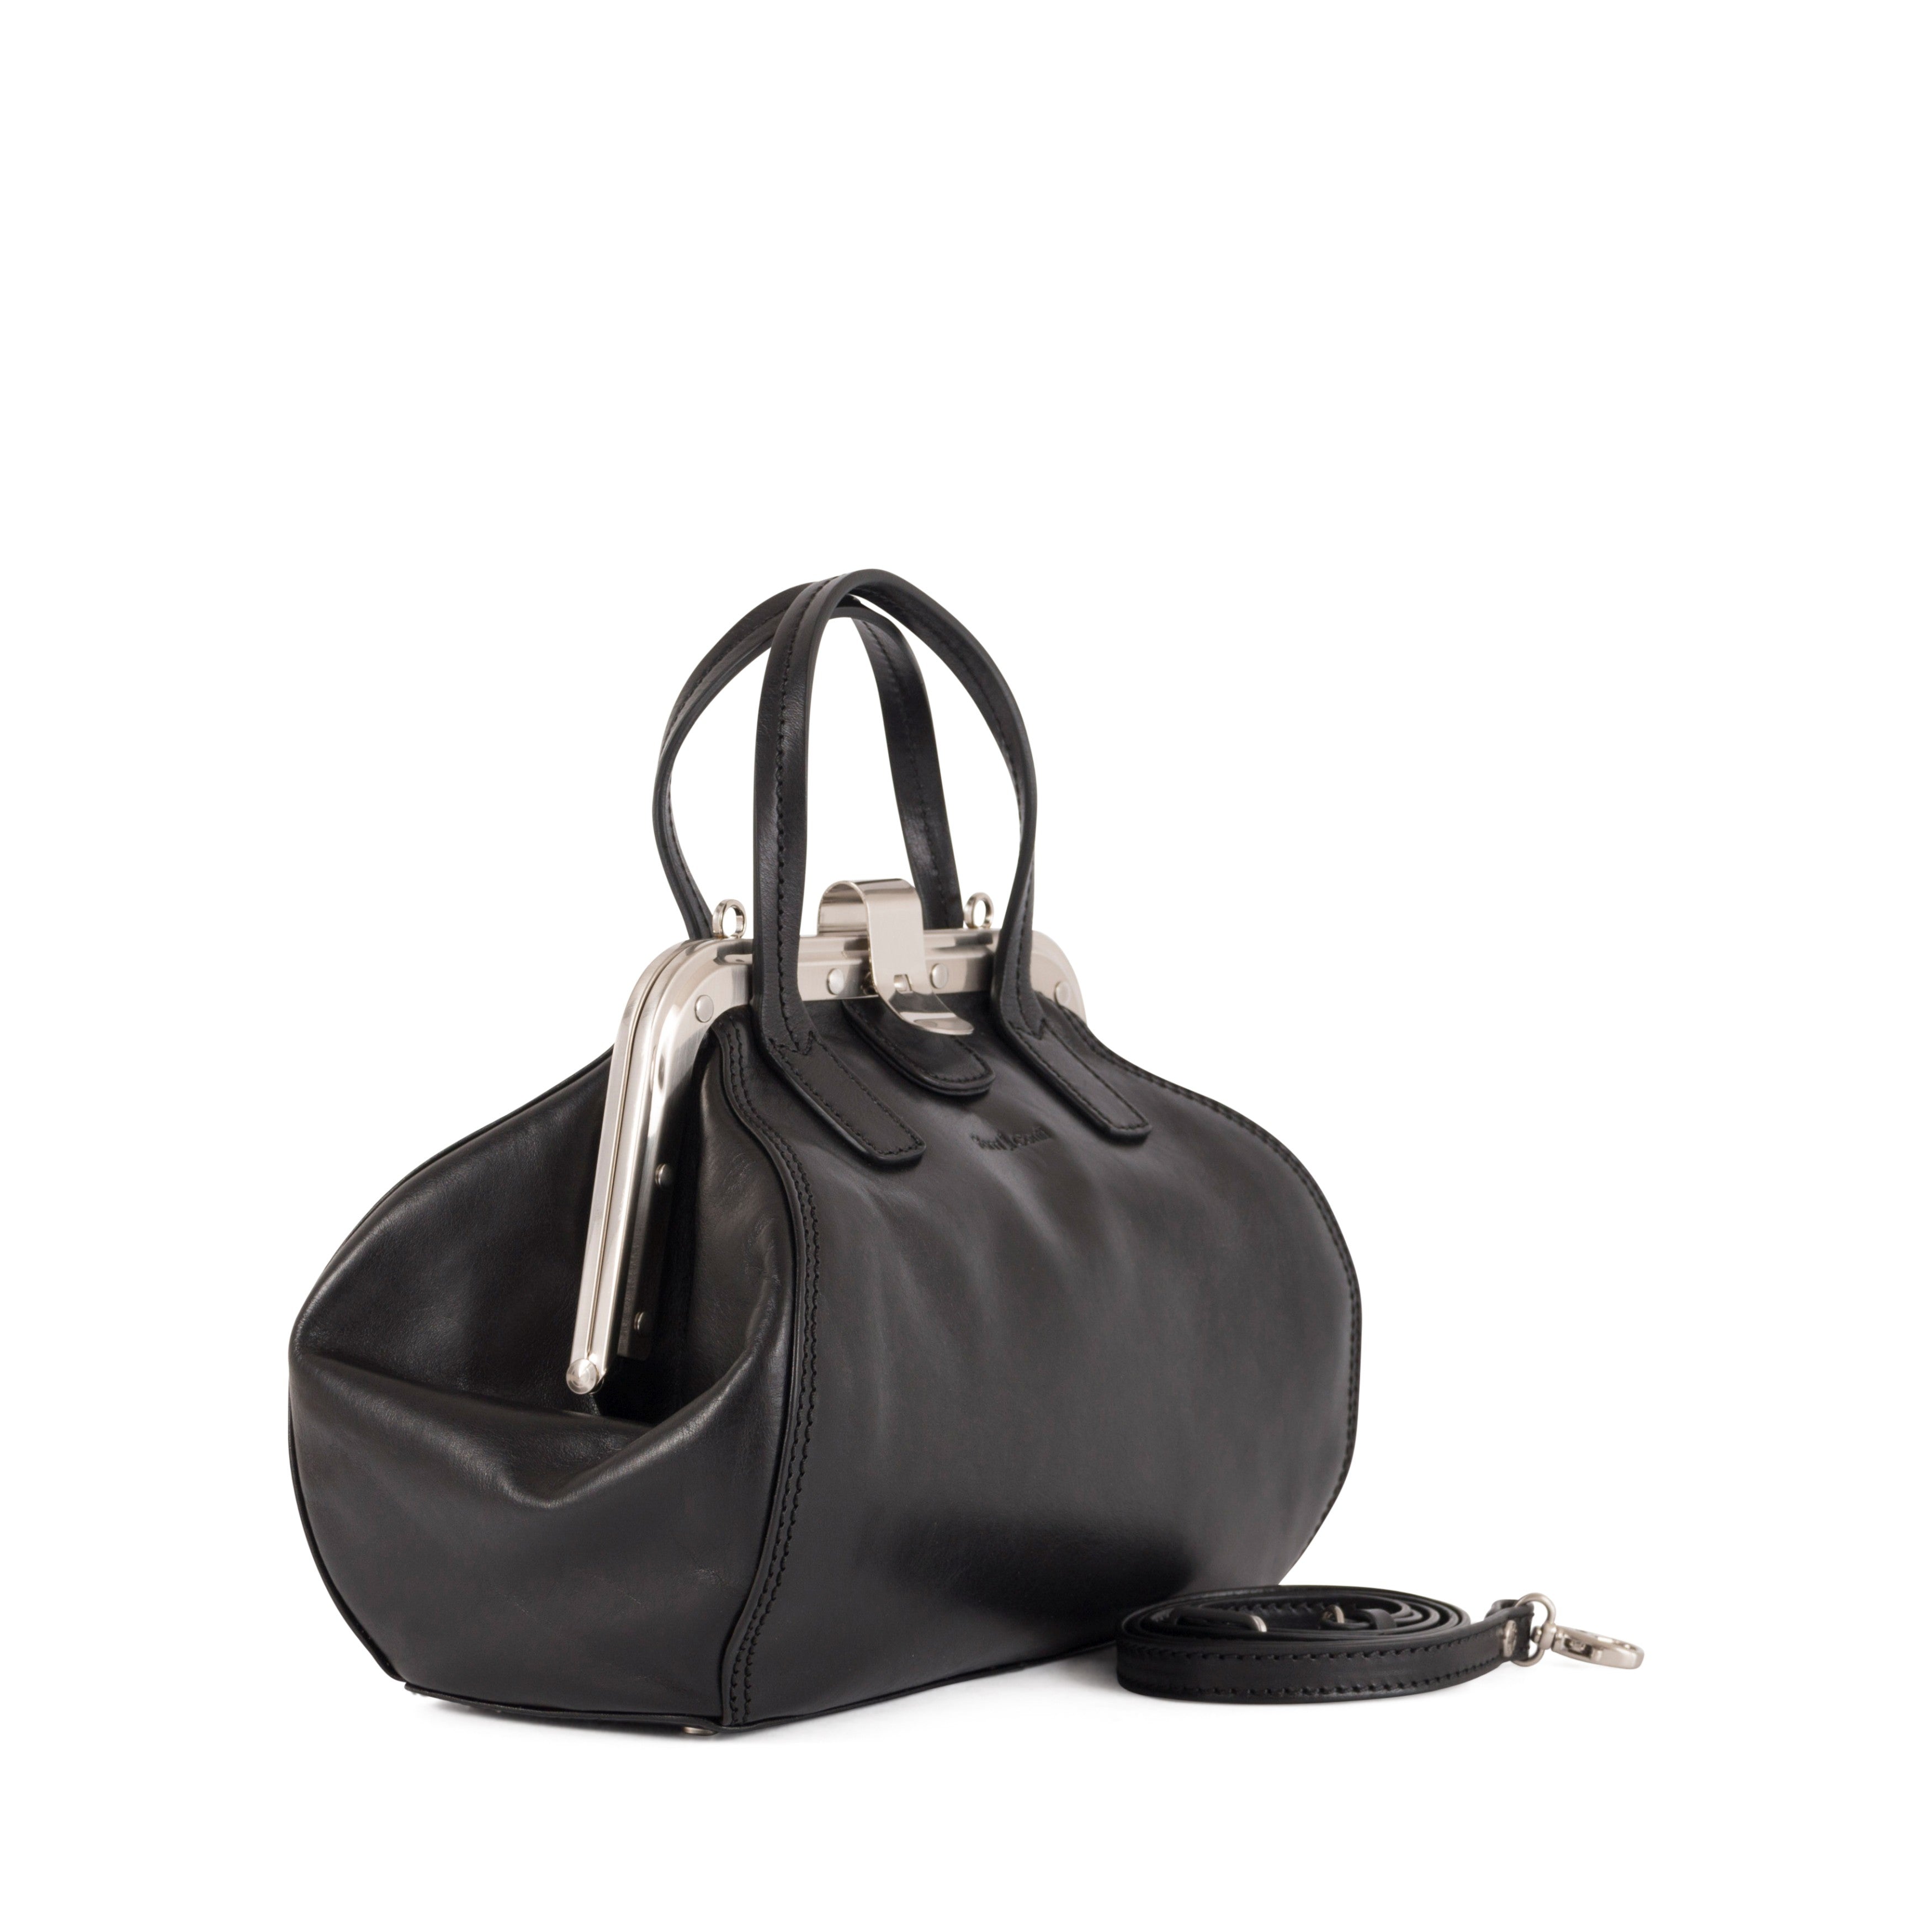 Gianni Conti Erica Top Handle Bag - Vegetable-Tanned Leather